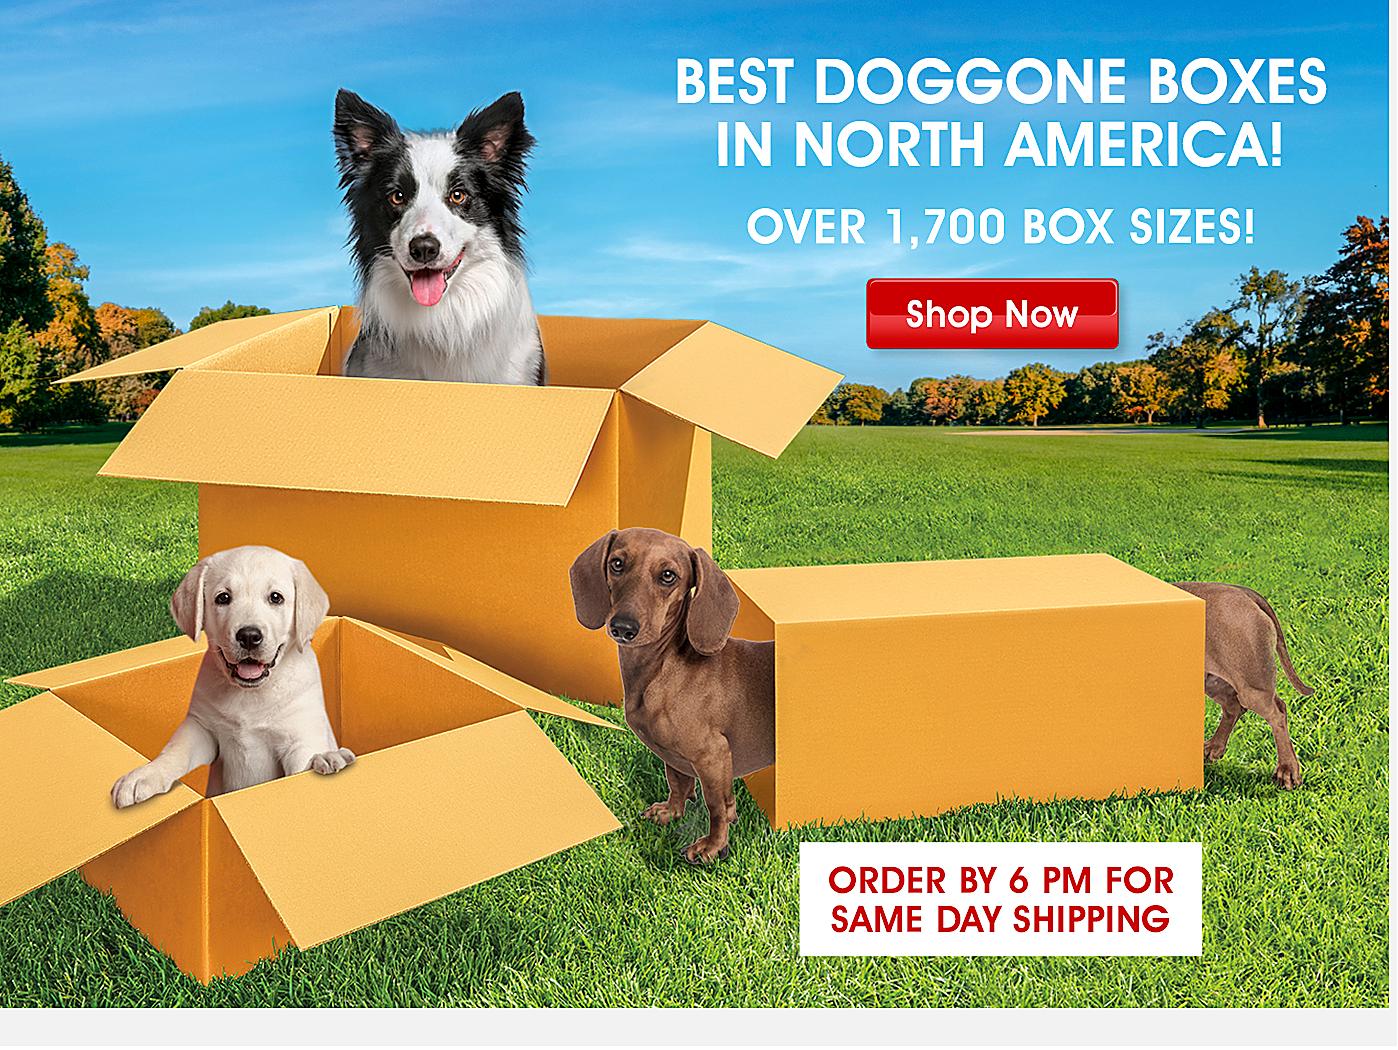 Best Dog-gone boxes in North America! Over 1,700 Box Sizes in North America. Shop Now. ORDER BY 6 PM FOR SAME DAY SHIPPING